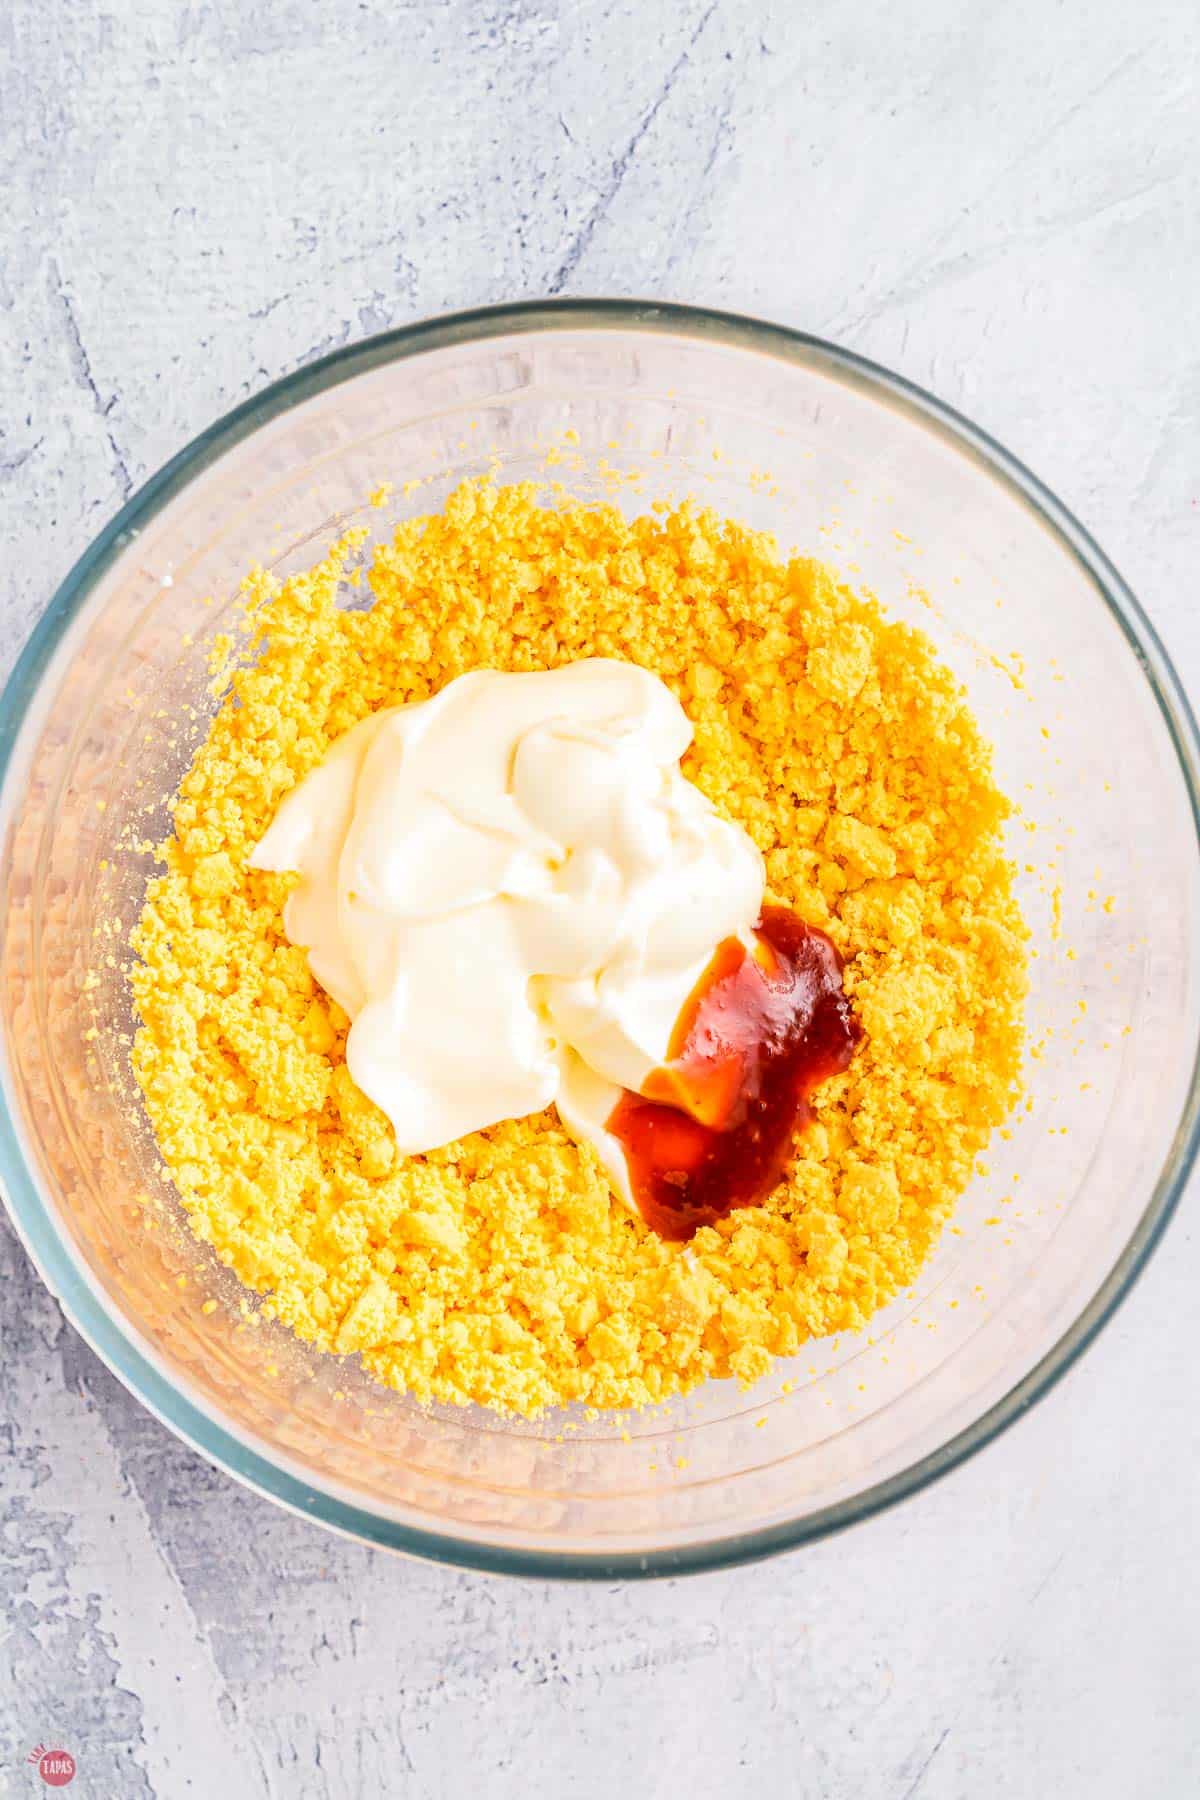 crumbled egg yolk with mayo and sriracha in a clear bowl